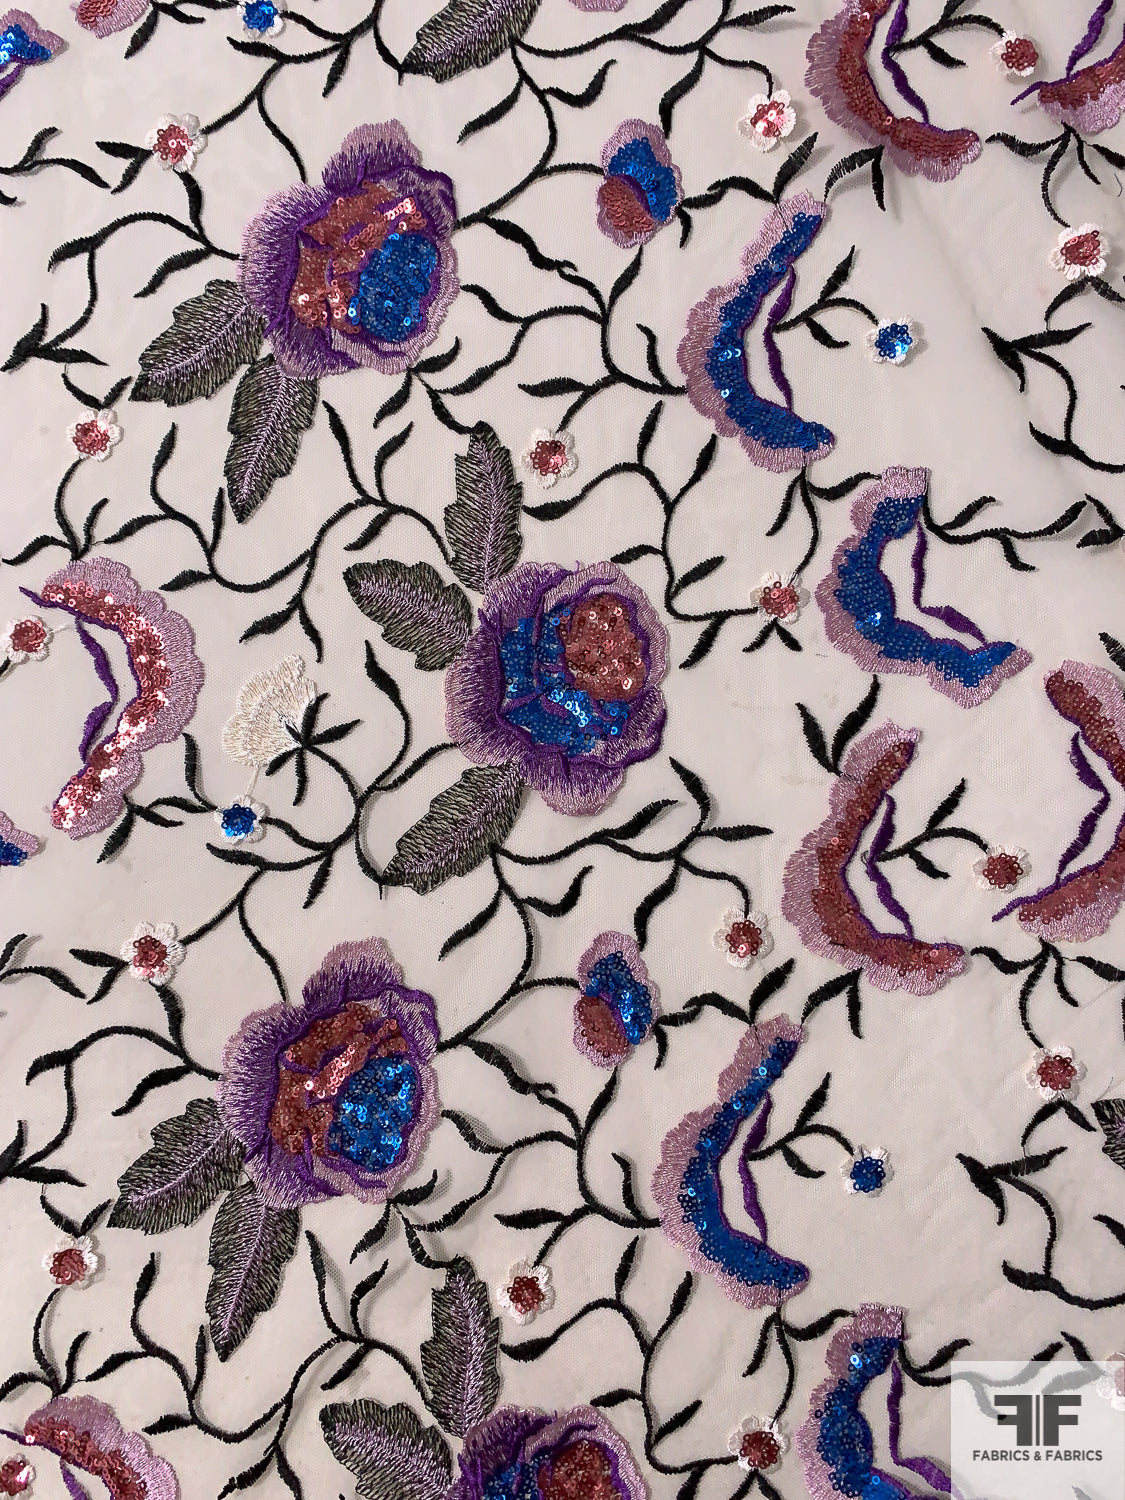 Floral Embroidered Champagne-Based Fine Netting with Sequins Enhancements - Purples / Pinks / Blue / Black